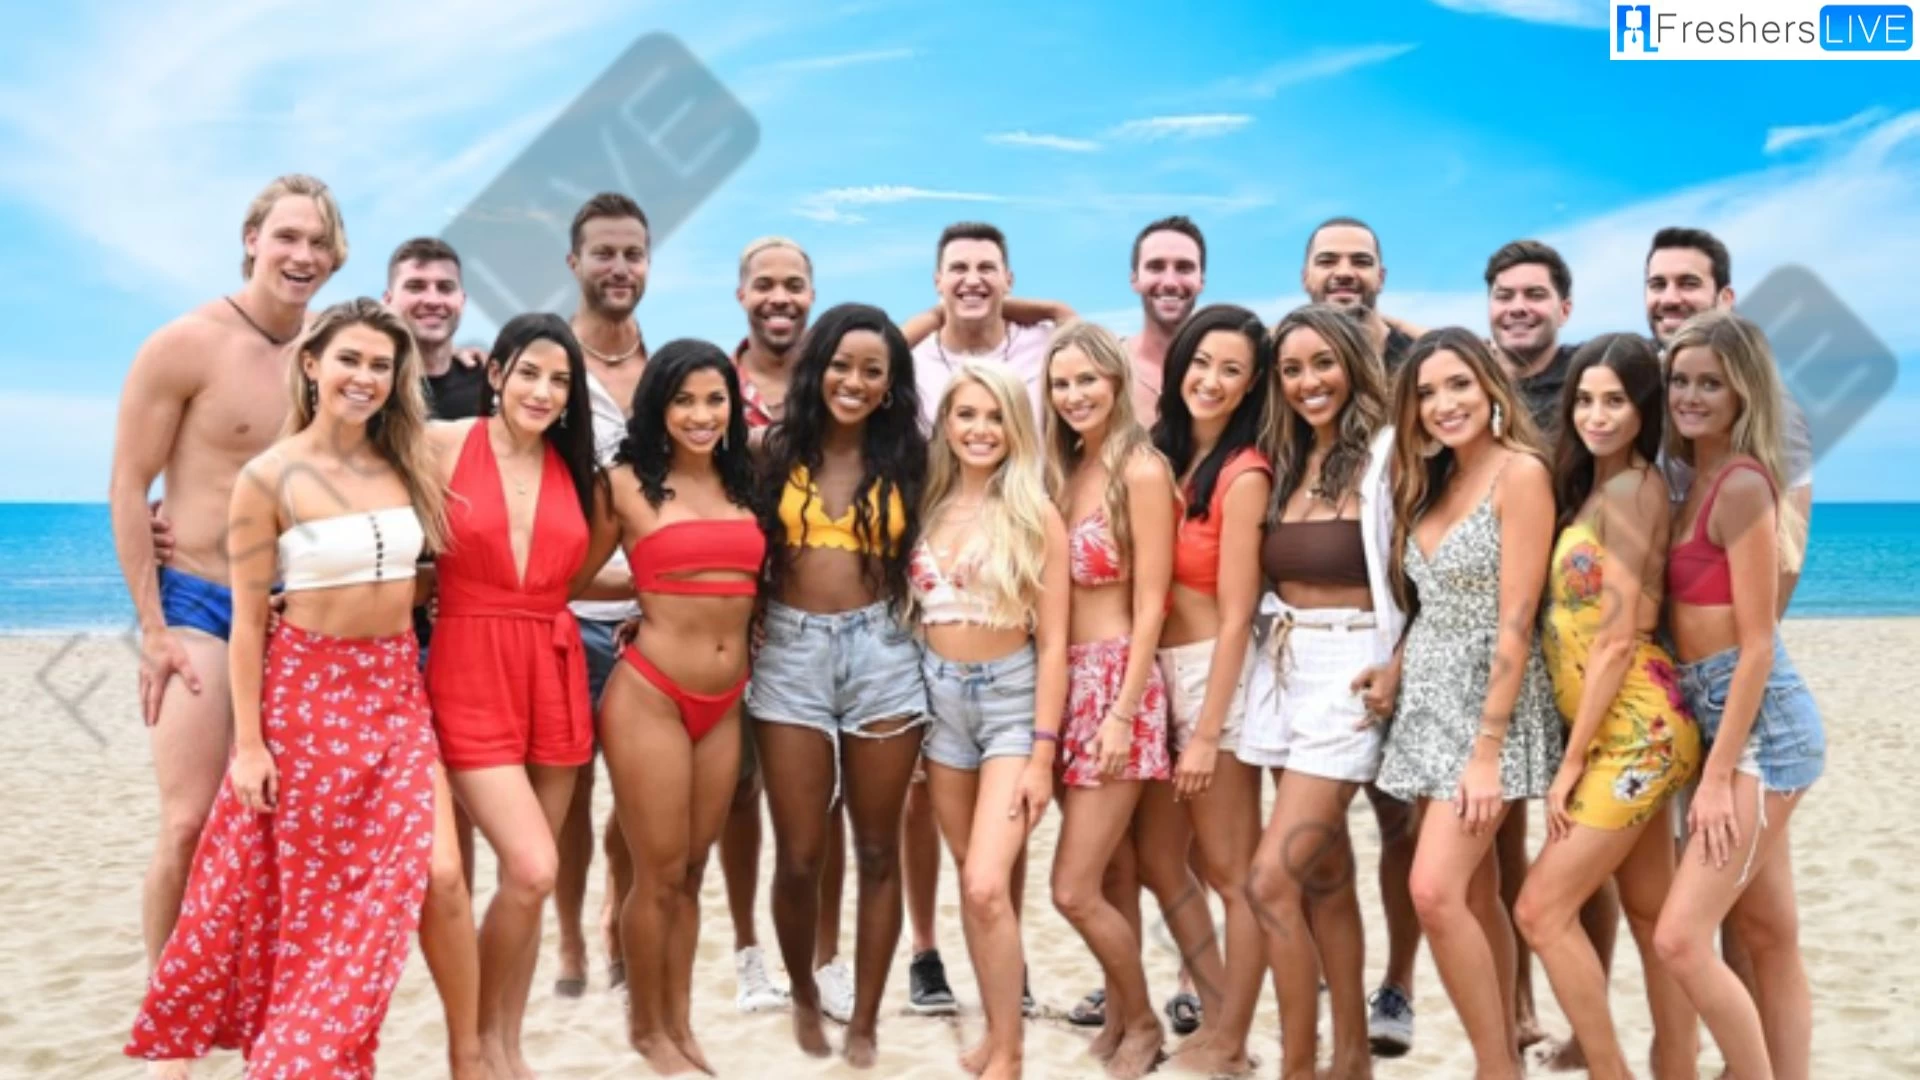 Bachelor In Paradise Season 9 Episode 2 Release Date and Time, Countdown, When is it Coming Out?